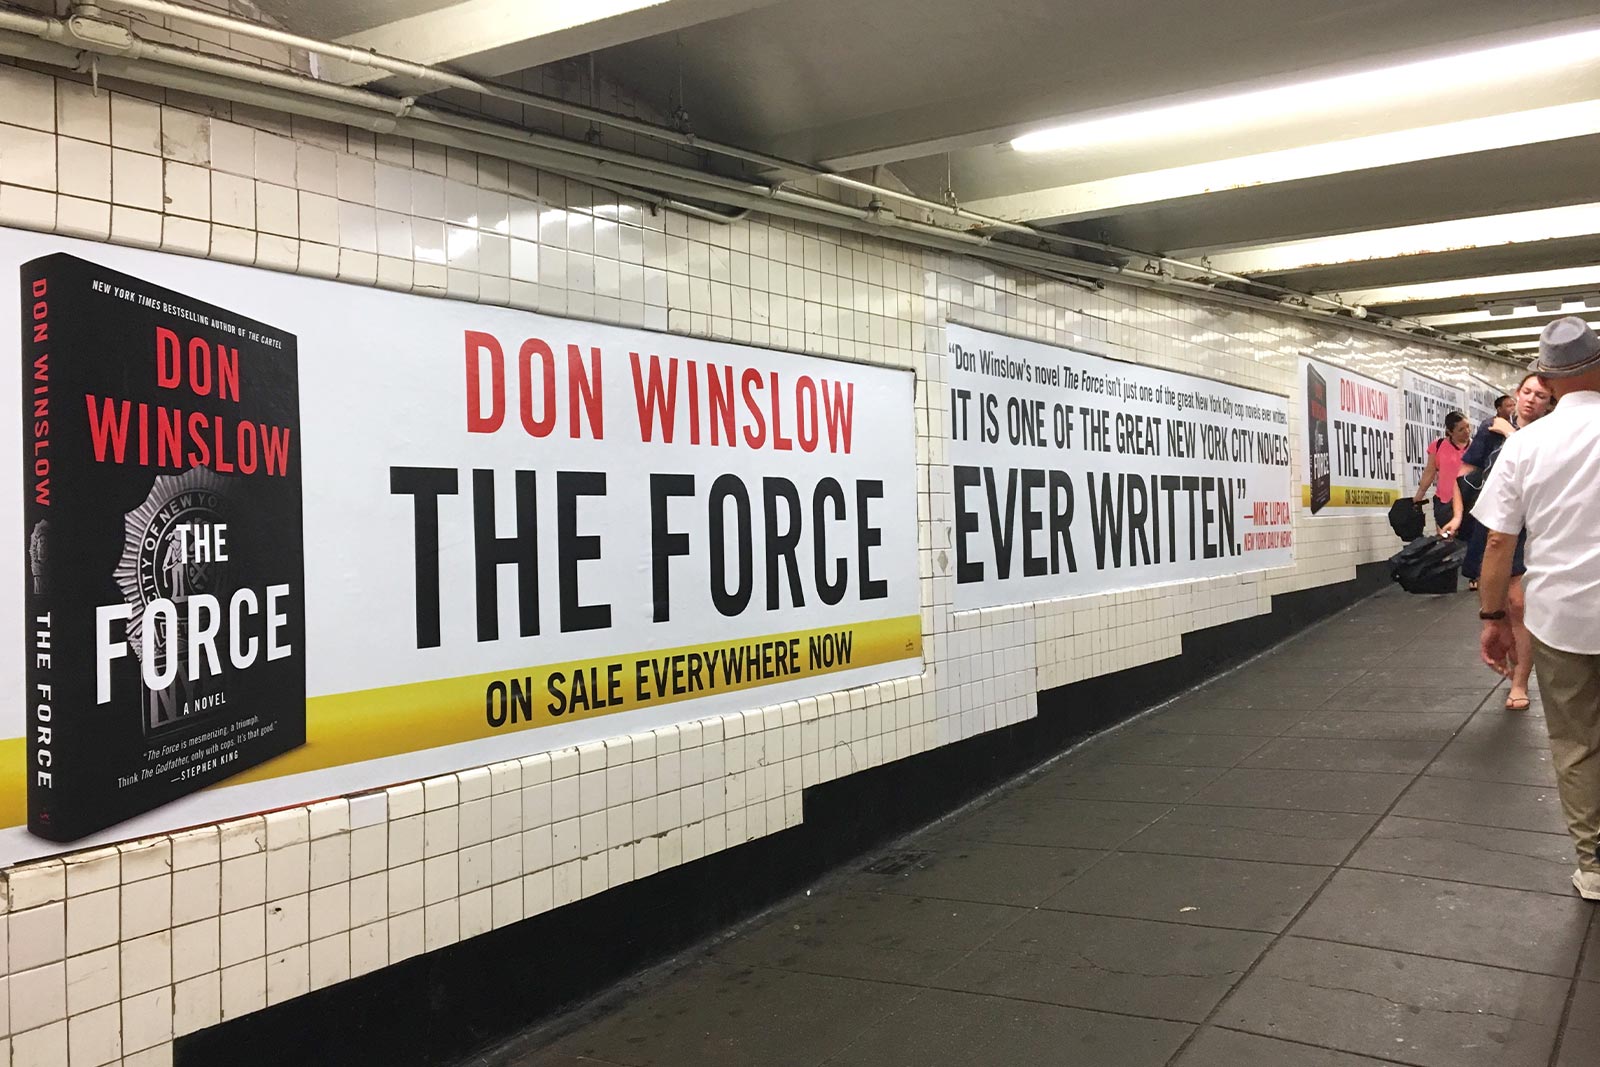 Don Winslow - The Force - W4th Station - Posters in Corridor